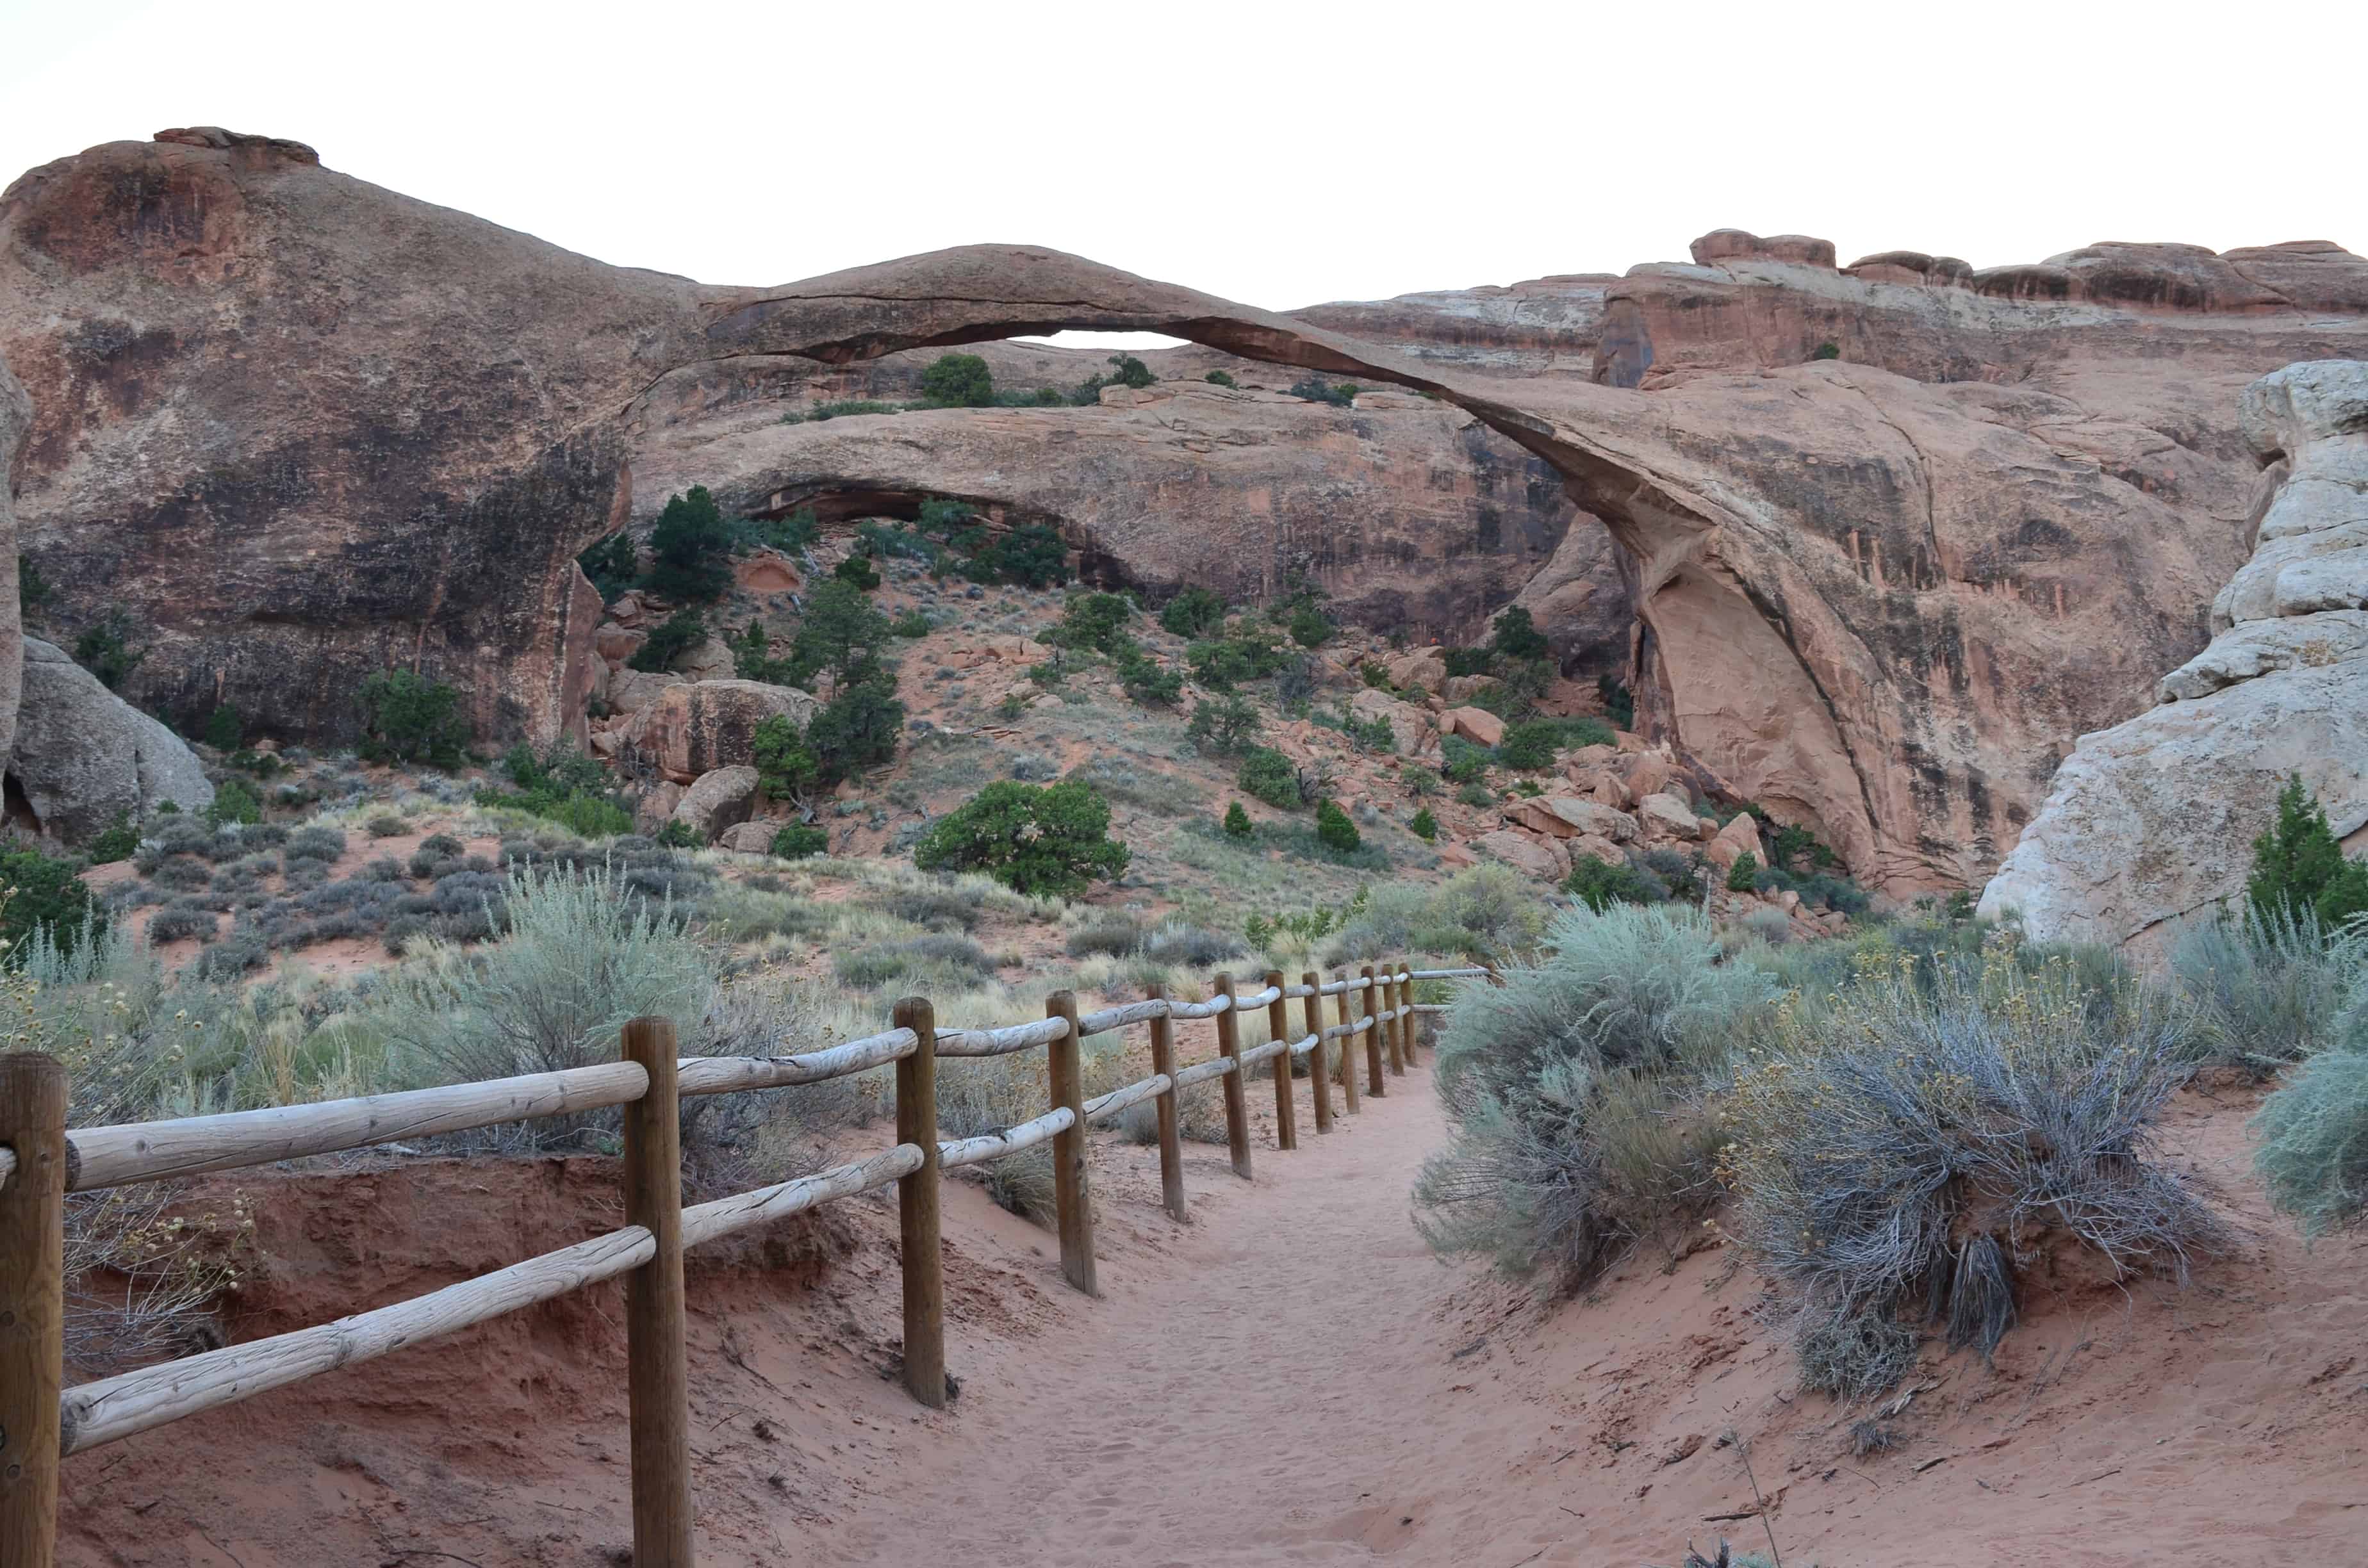 Landscape Arch on the Devil's Garden Trail at Arches National Park in Utah